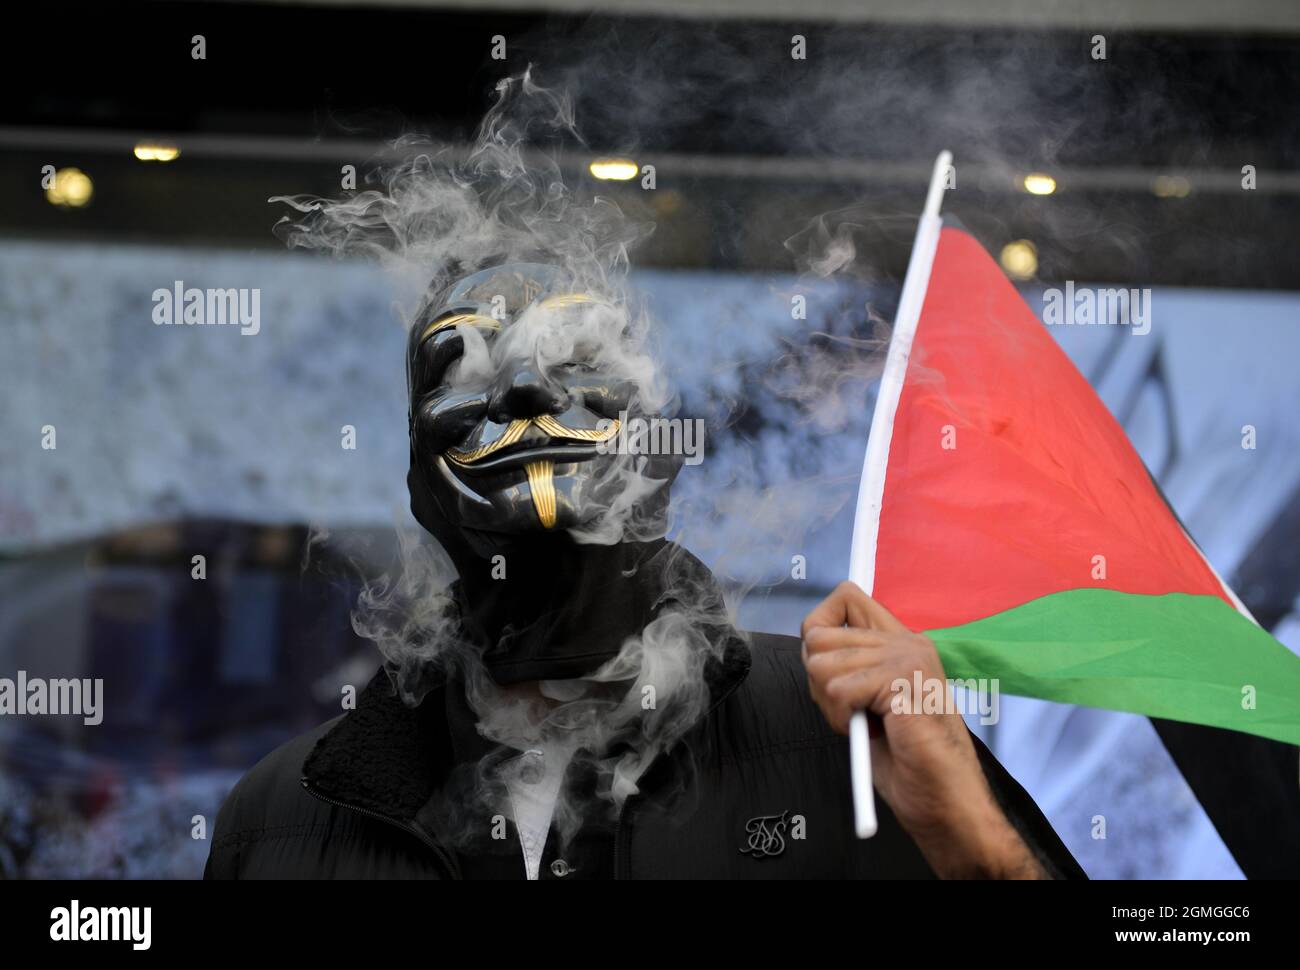 A protestor wearing a Guy Fawkes holding a Palestinian flag, smoking, during the demonstration.Boycott Puma protest organised by Palestine Solidarity Campaign and FOA (Friends of Al Aqsa) at Puma flagship store on Carnaby Street, London. Activists demonstrated against Puma's sponsorship of the IFA (Israel Football Association). (Photo by Thomas Krych / SOPA Images/Sipa USA) Stock Photo